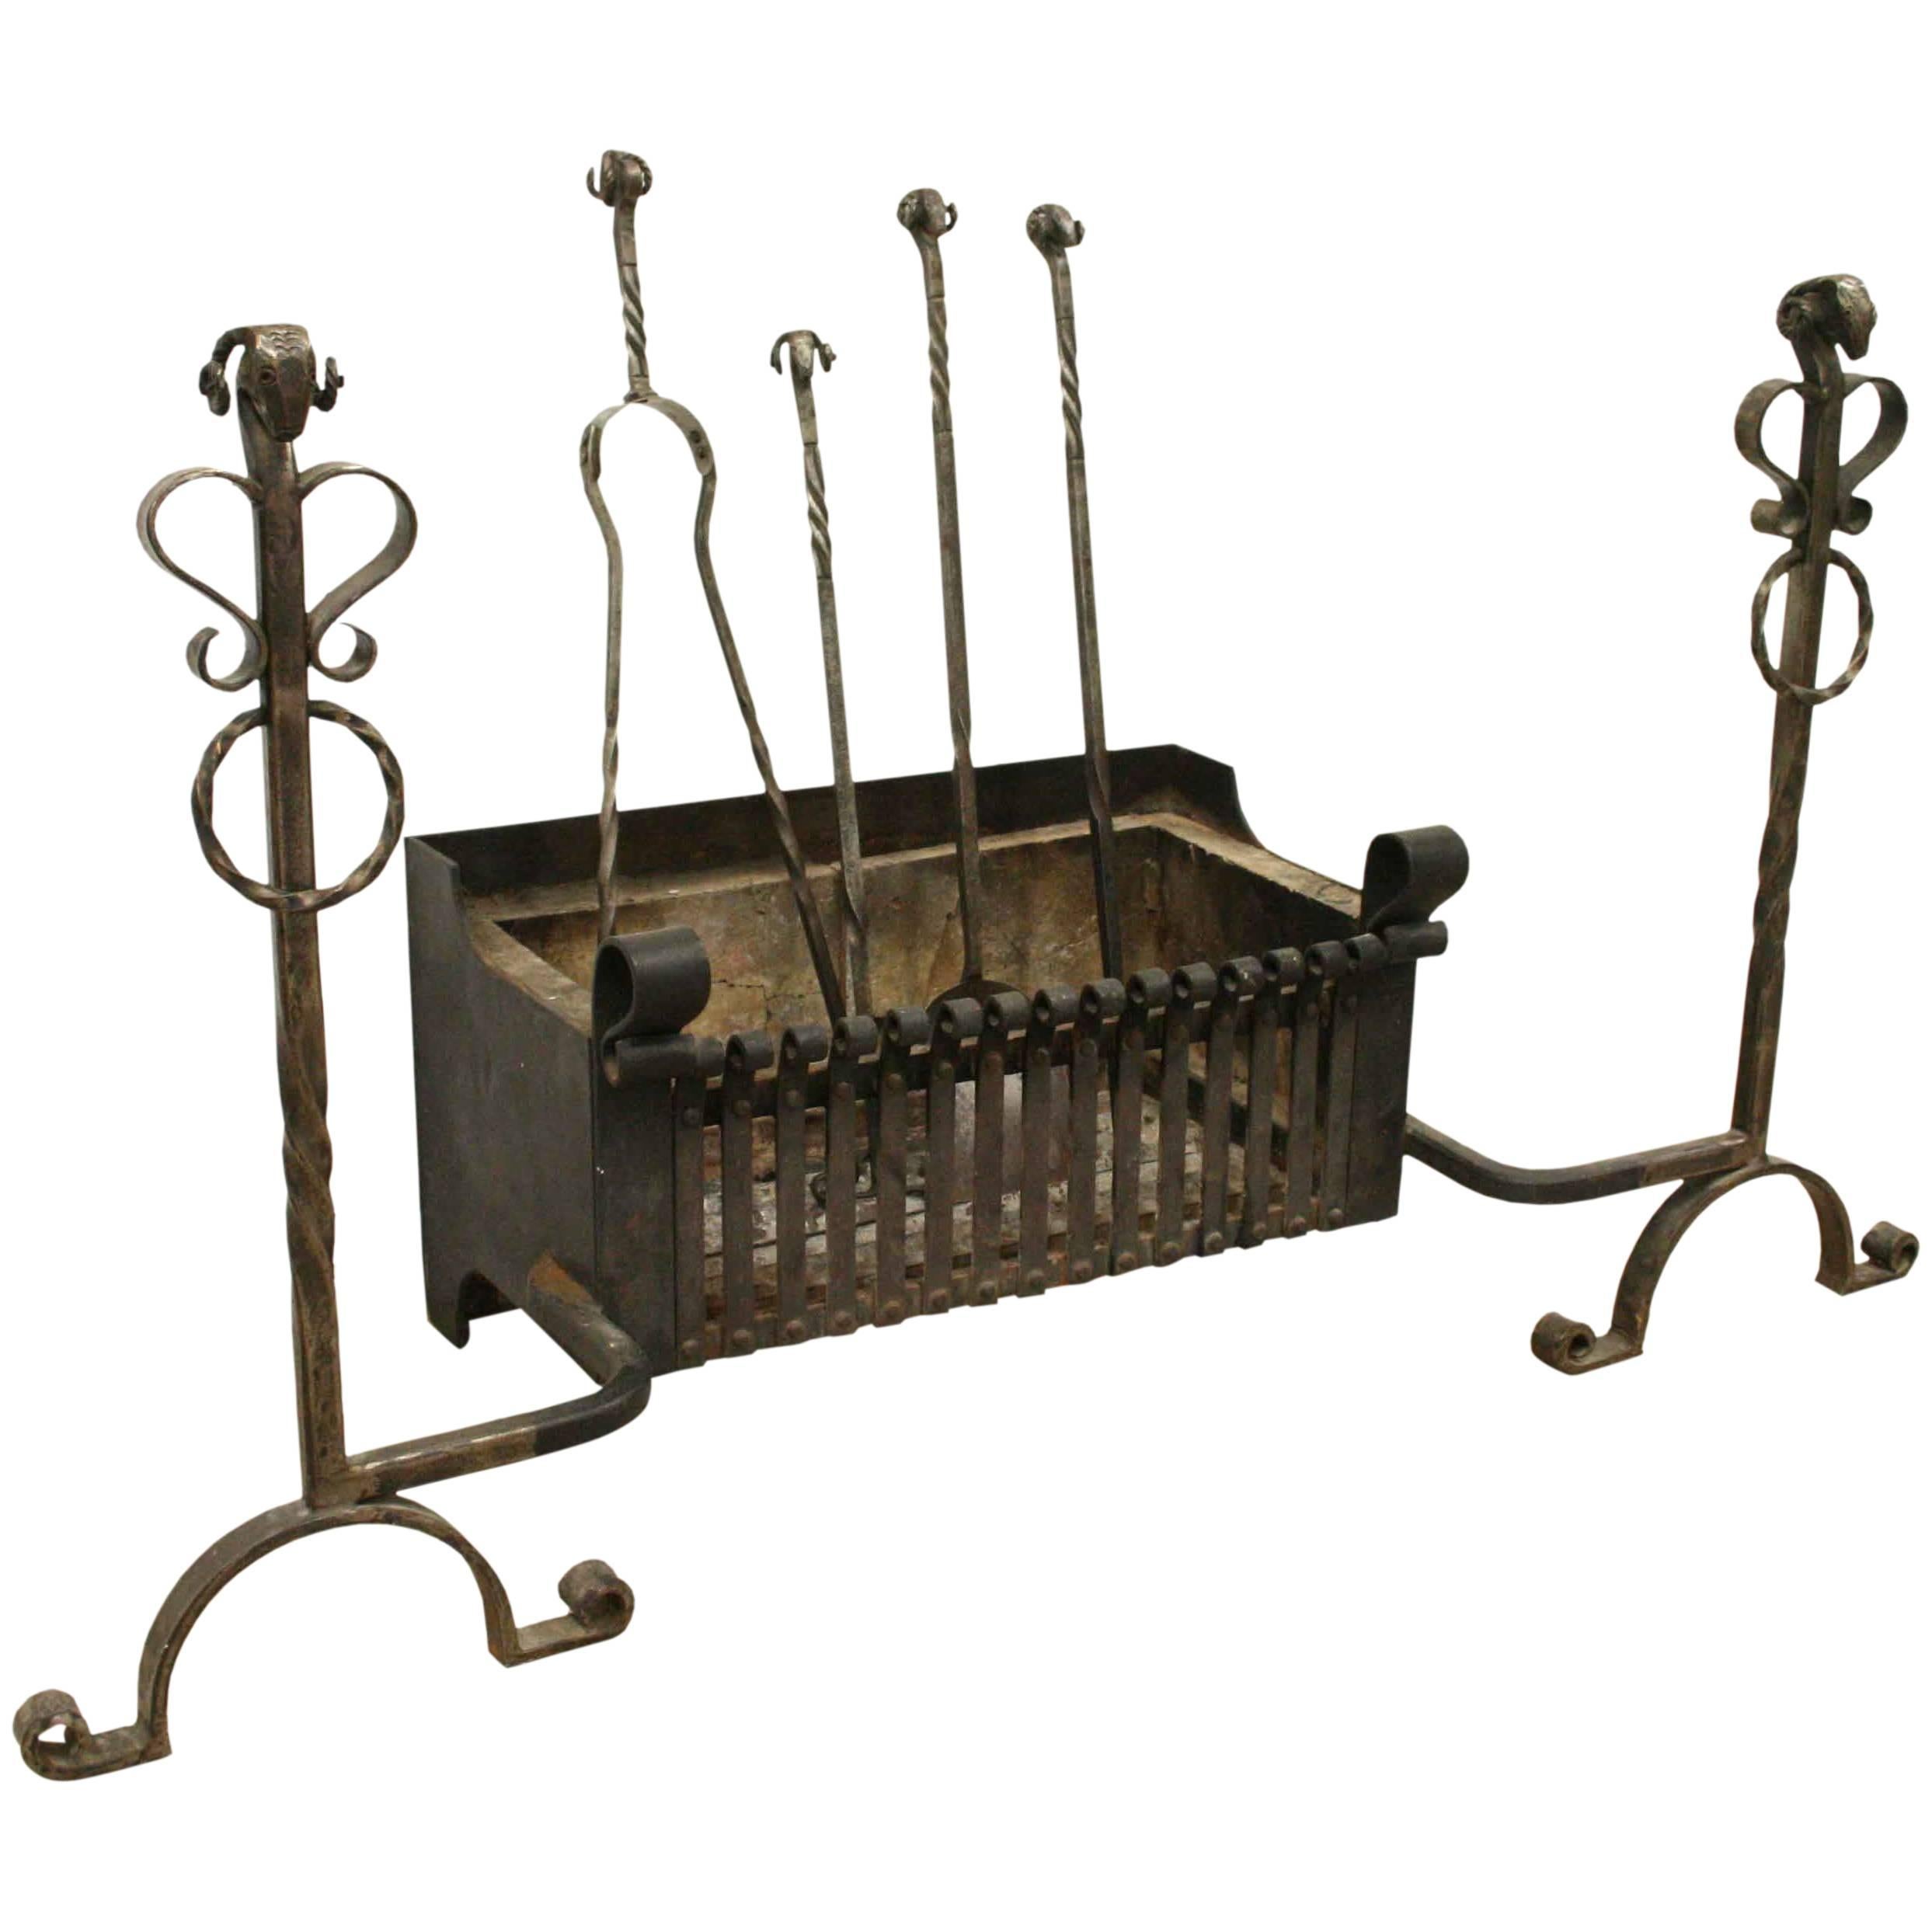 Mid-20th century, unusual handmade 17th century style fire grate with integral fire dogs with twisted decorations and ram's head motifs, and matching set of four fire irons.